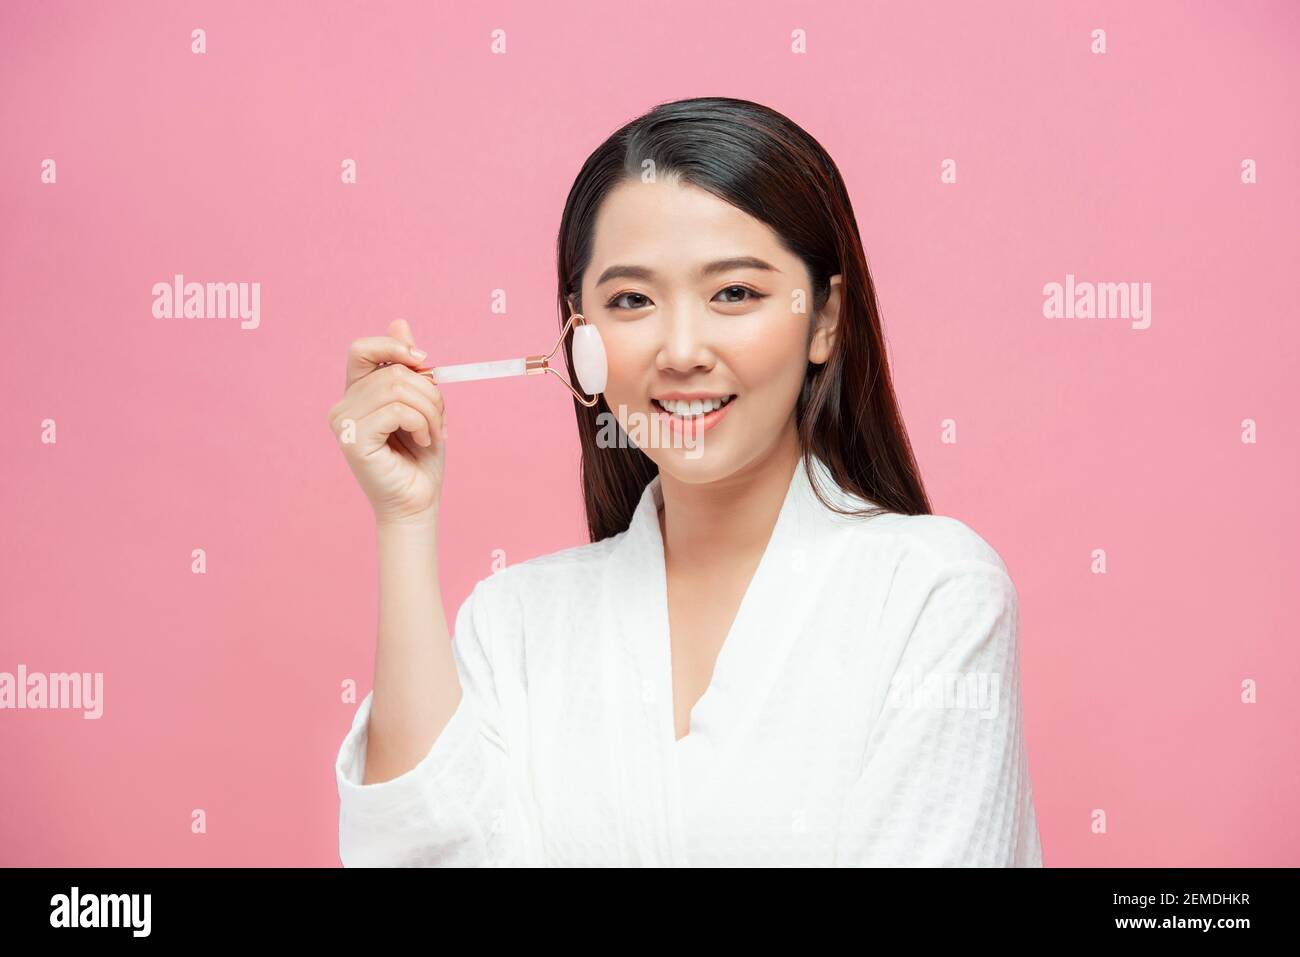 Beautiful young woman with perfect skin using a rose quartz face roller with natural quartz stones Stock Photo